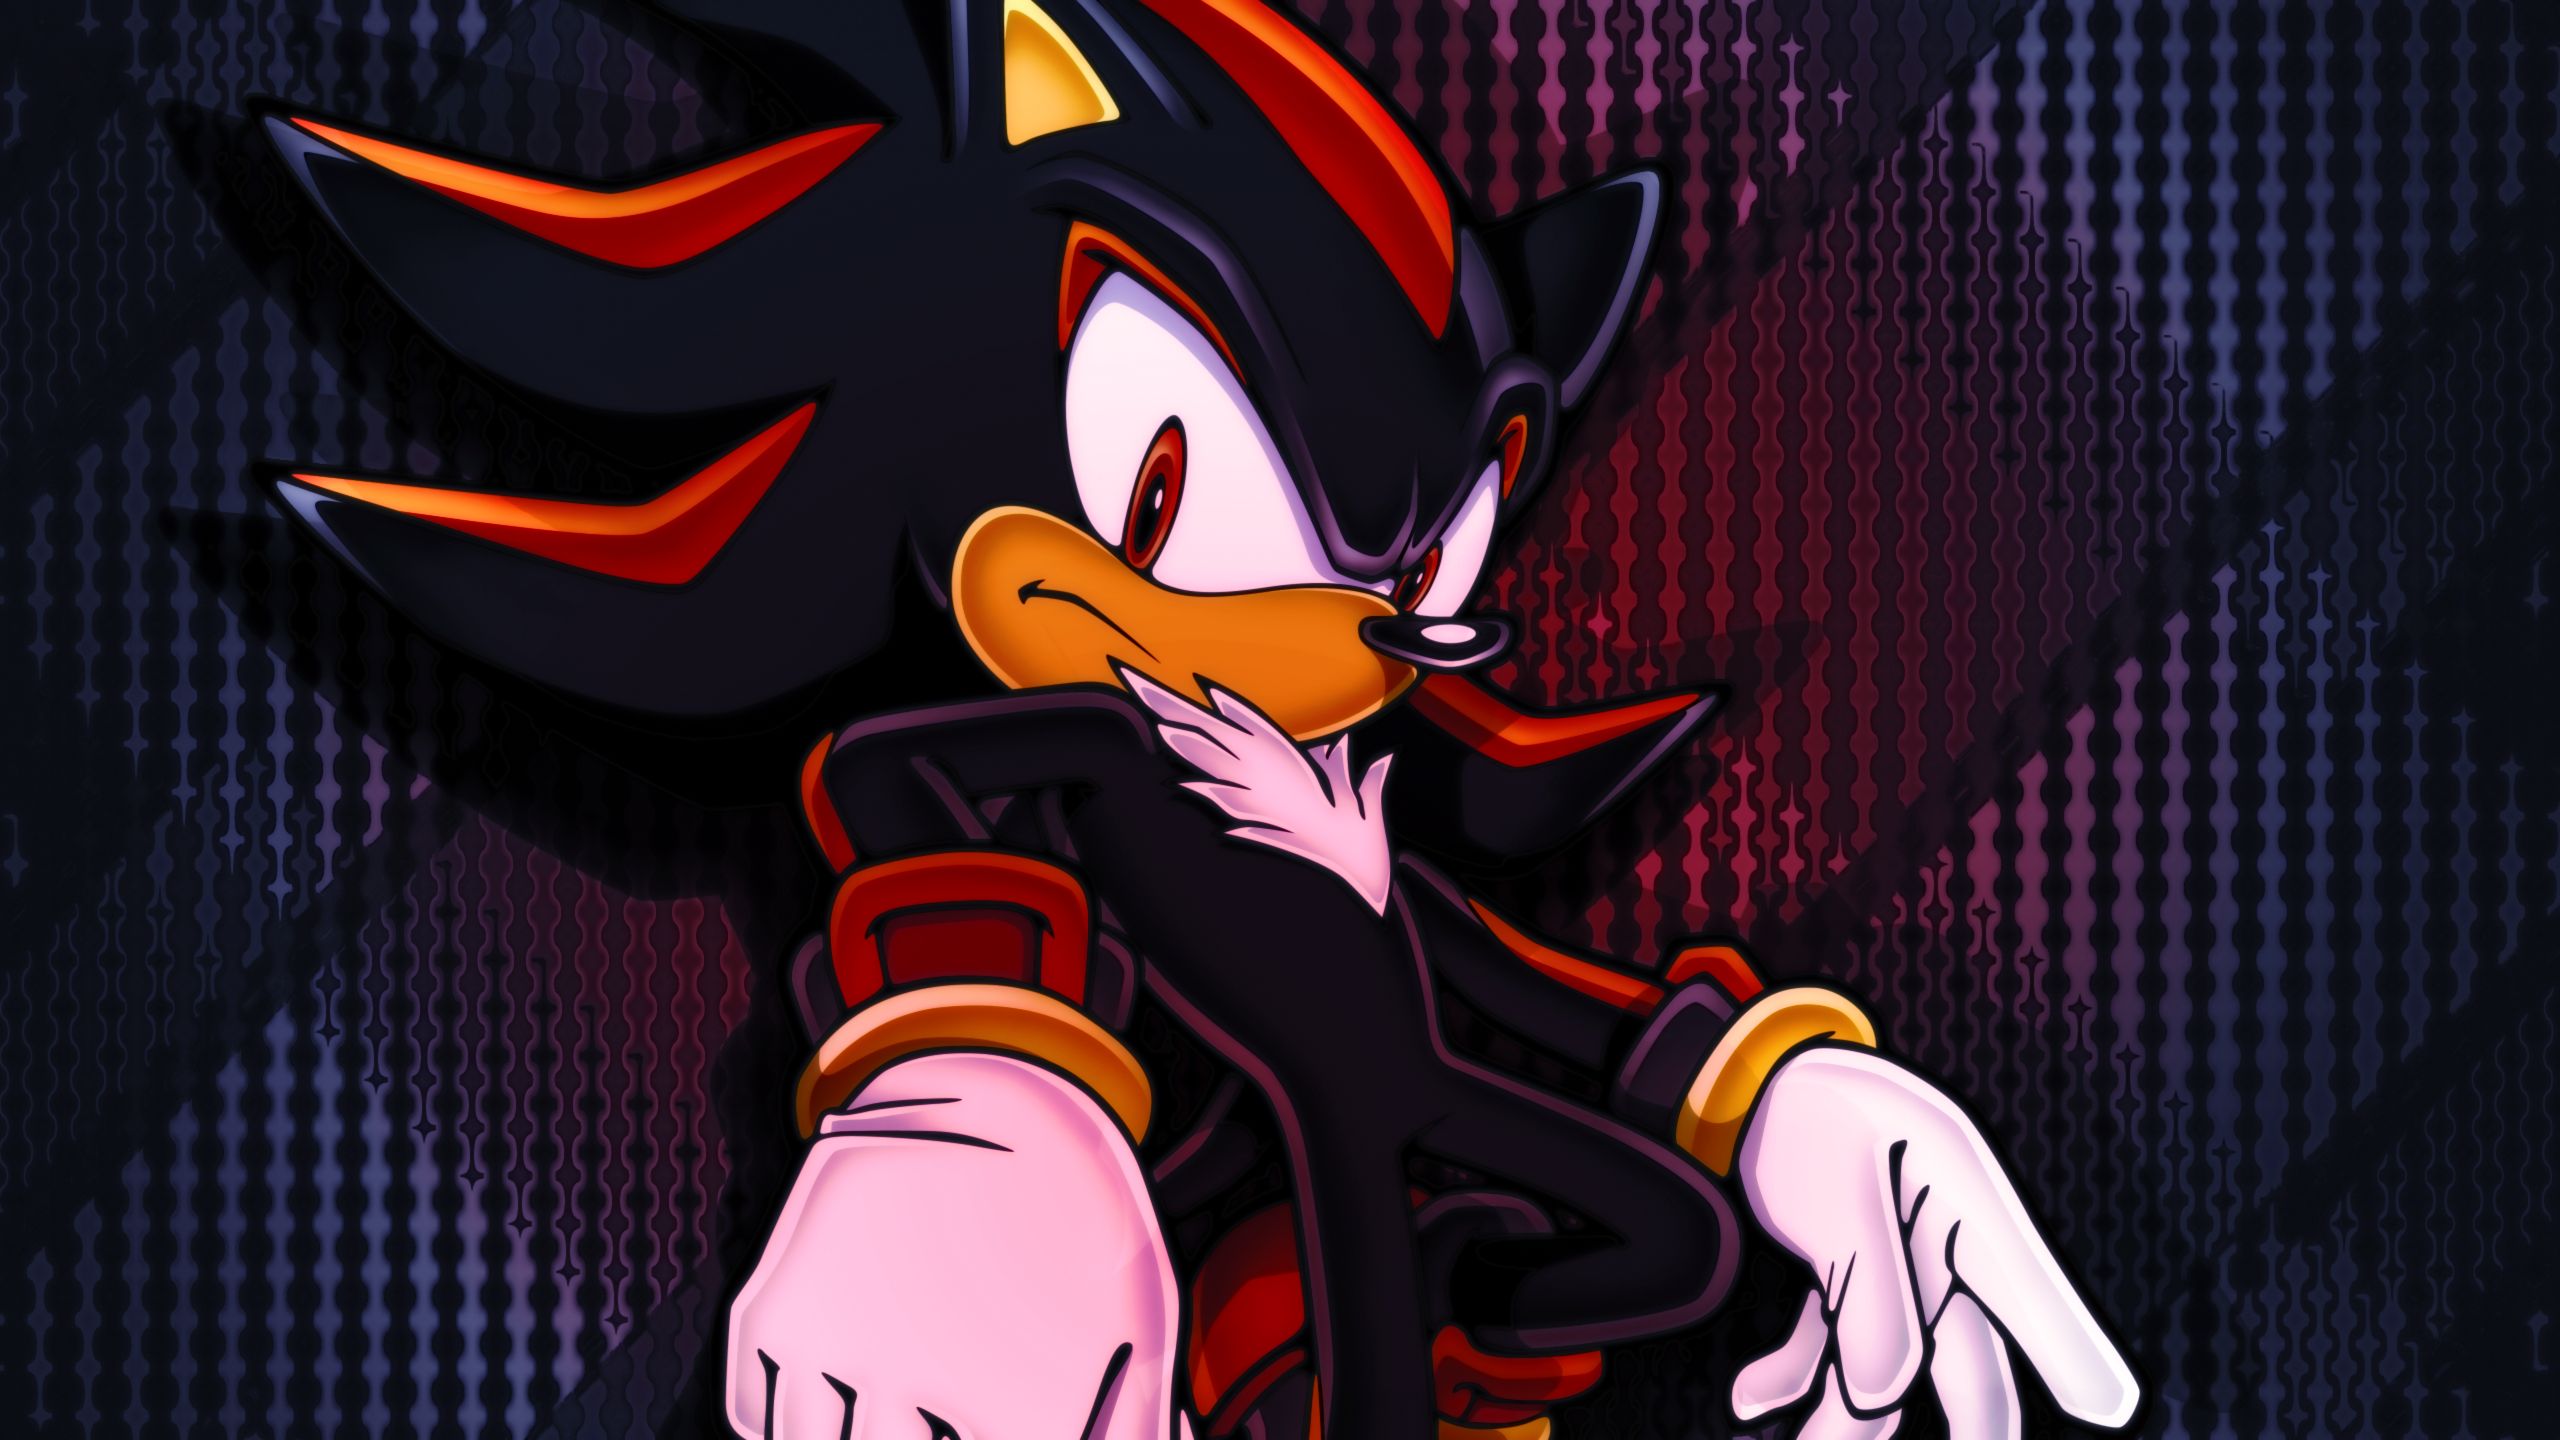 Shadow Sonic wallpaper by PrivacyPolice  Download on ZEDGE  5235